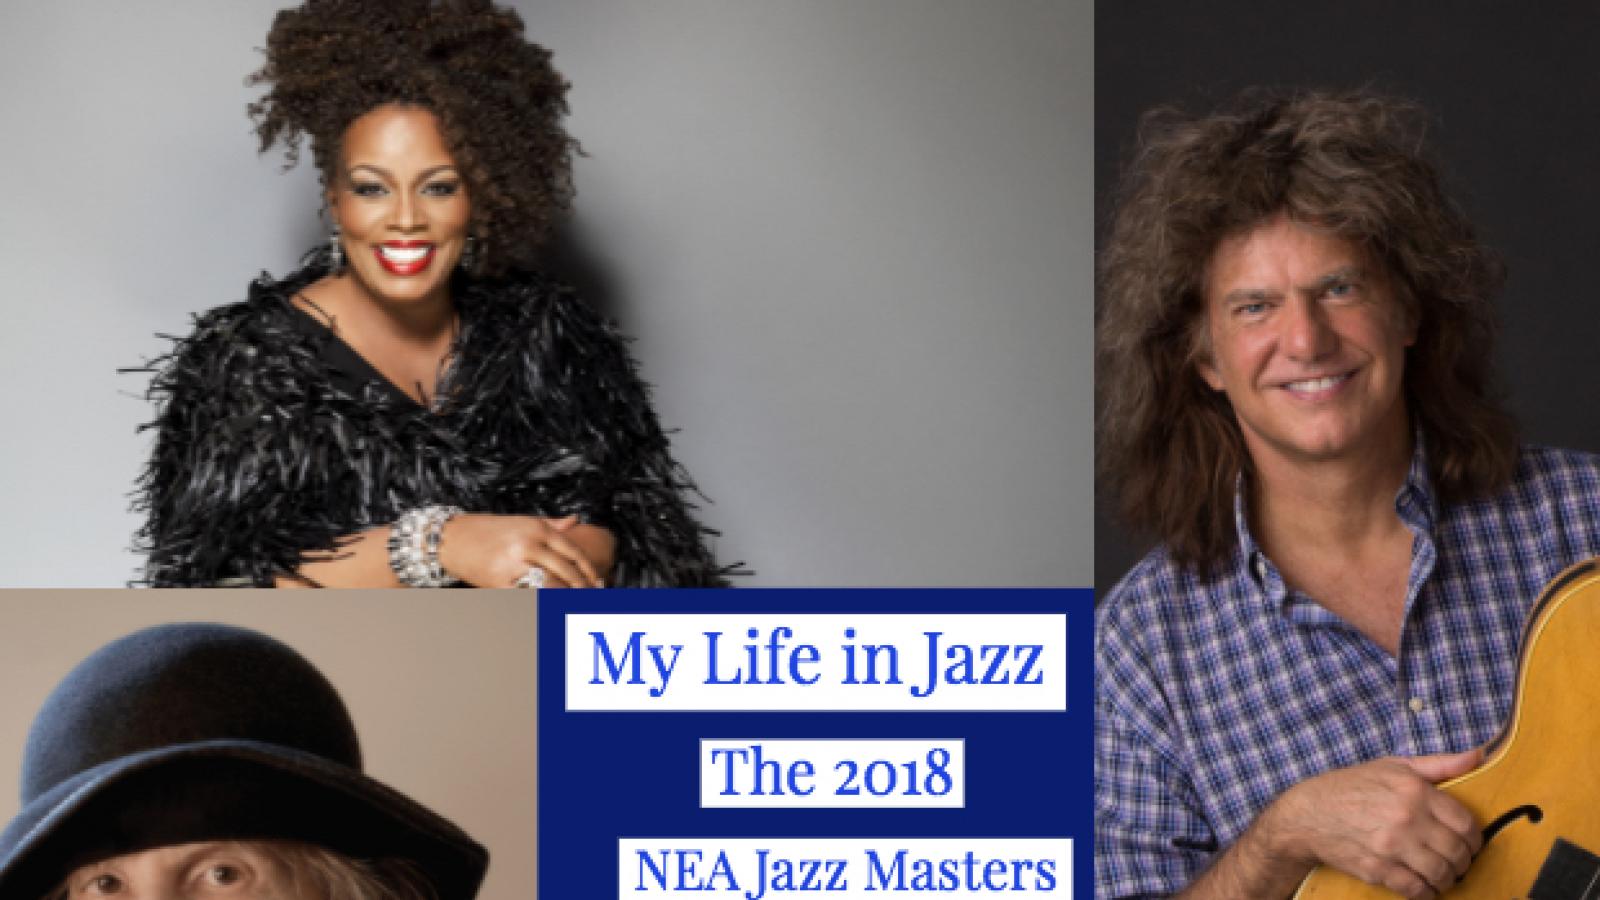 photos of 2018 NEA Jazz Masters with text from title